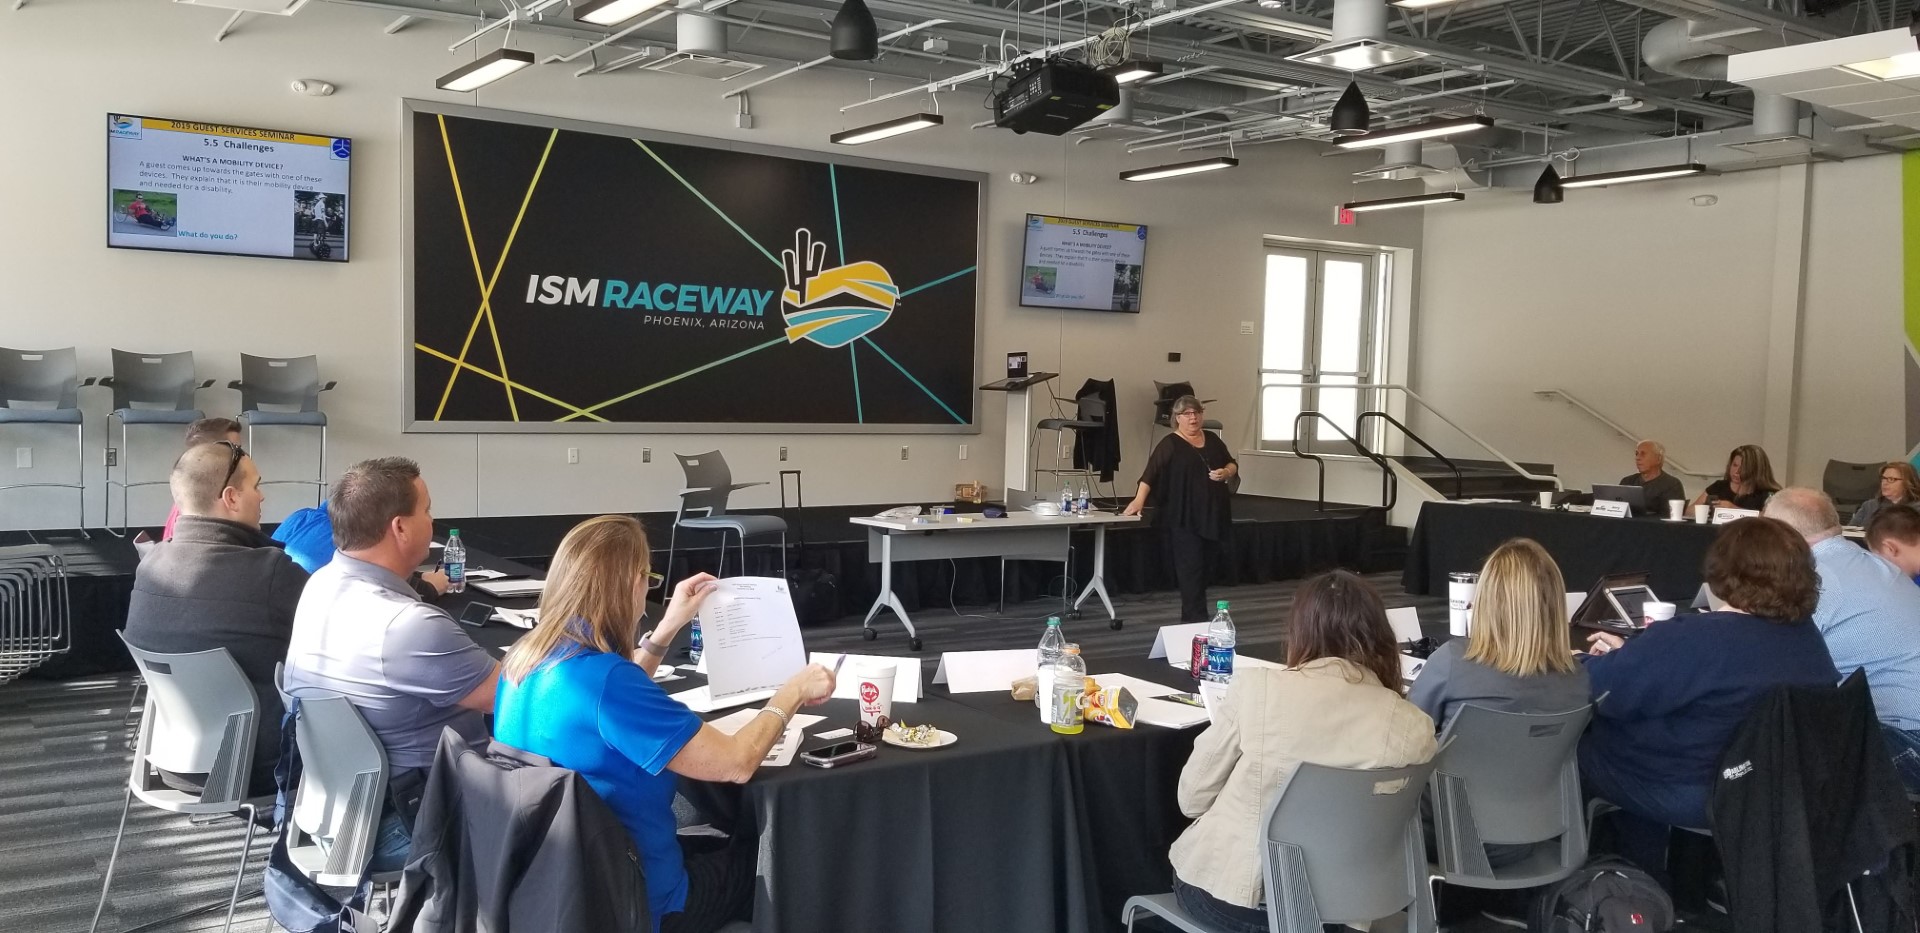 Dr. Nanette Odell leading a presentation for a small group of people at ISM Raceway